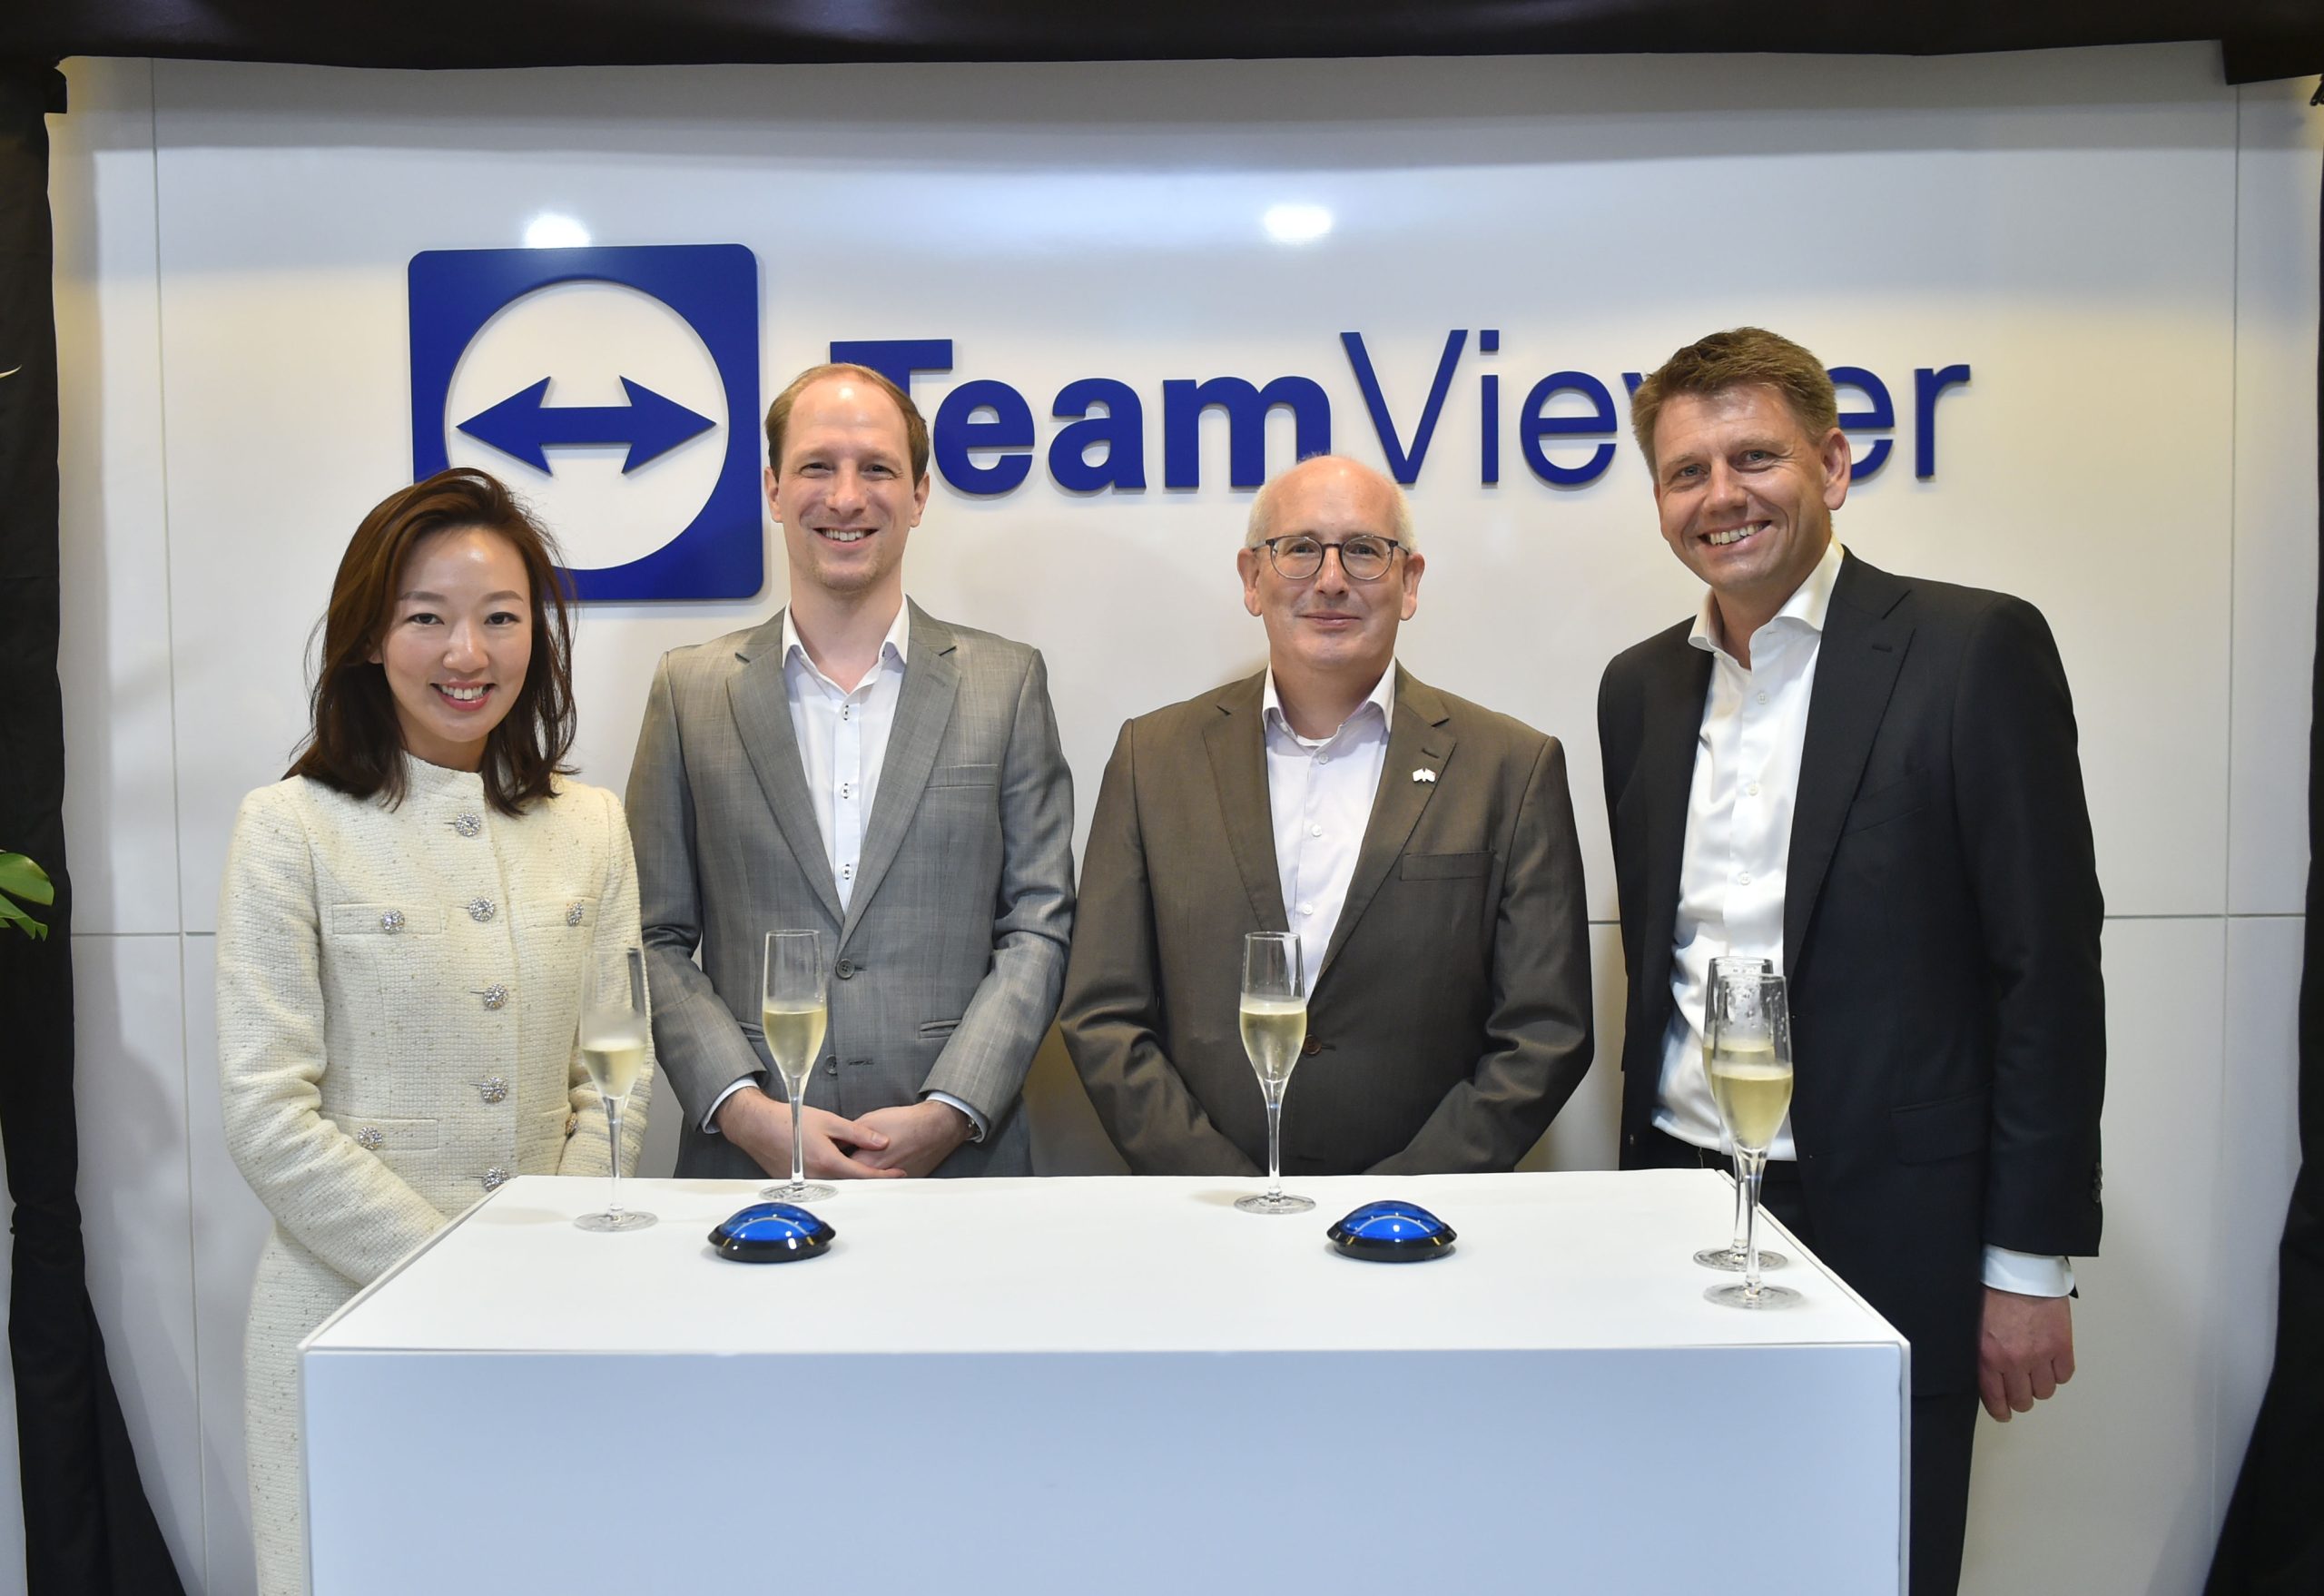 TeamViewer opens regional headquarter in Singapore to accelerate digital transformation across the APAC region